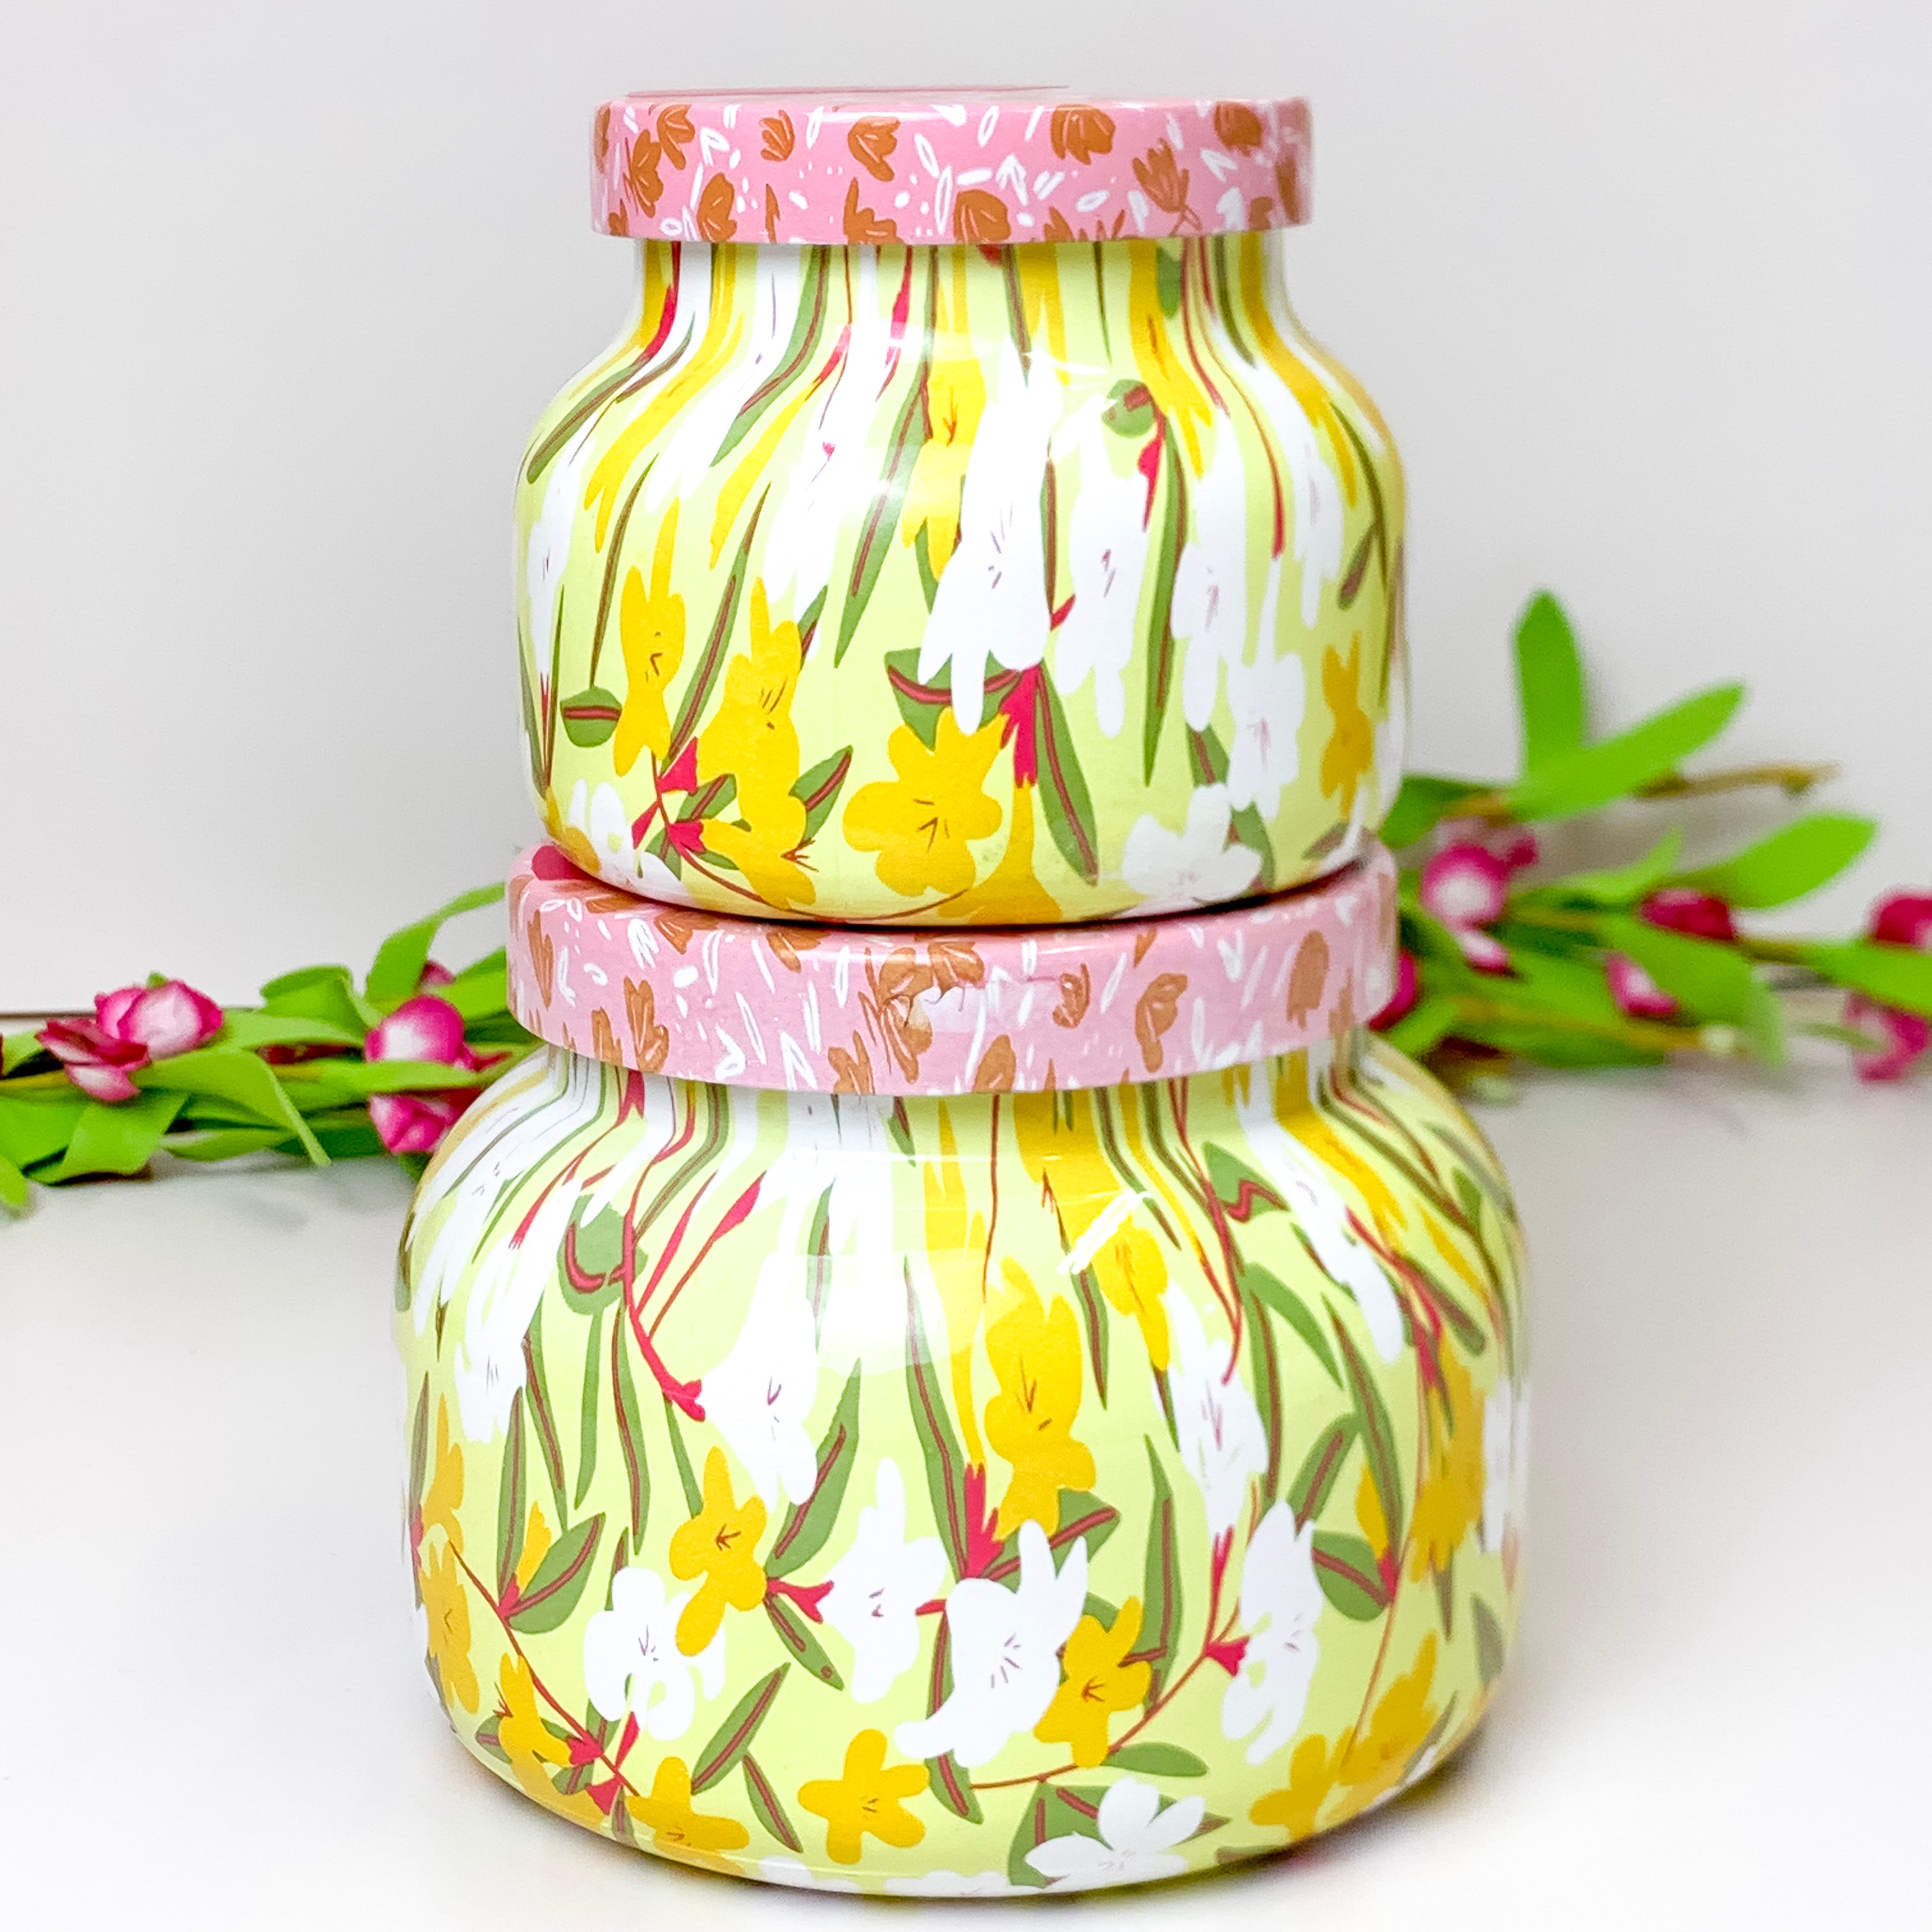 Capri Blue | 19 oz. Jar Candle in Pattern Play | Aloha Orchid - Giddy Up Glamour Boutique